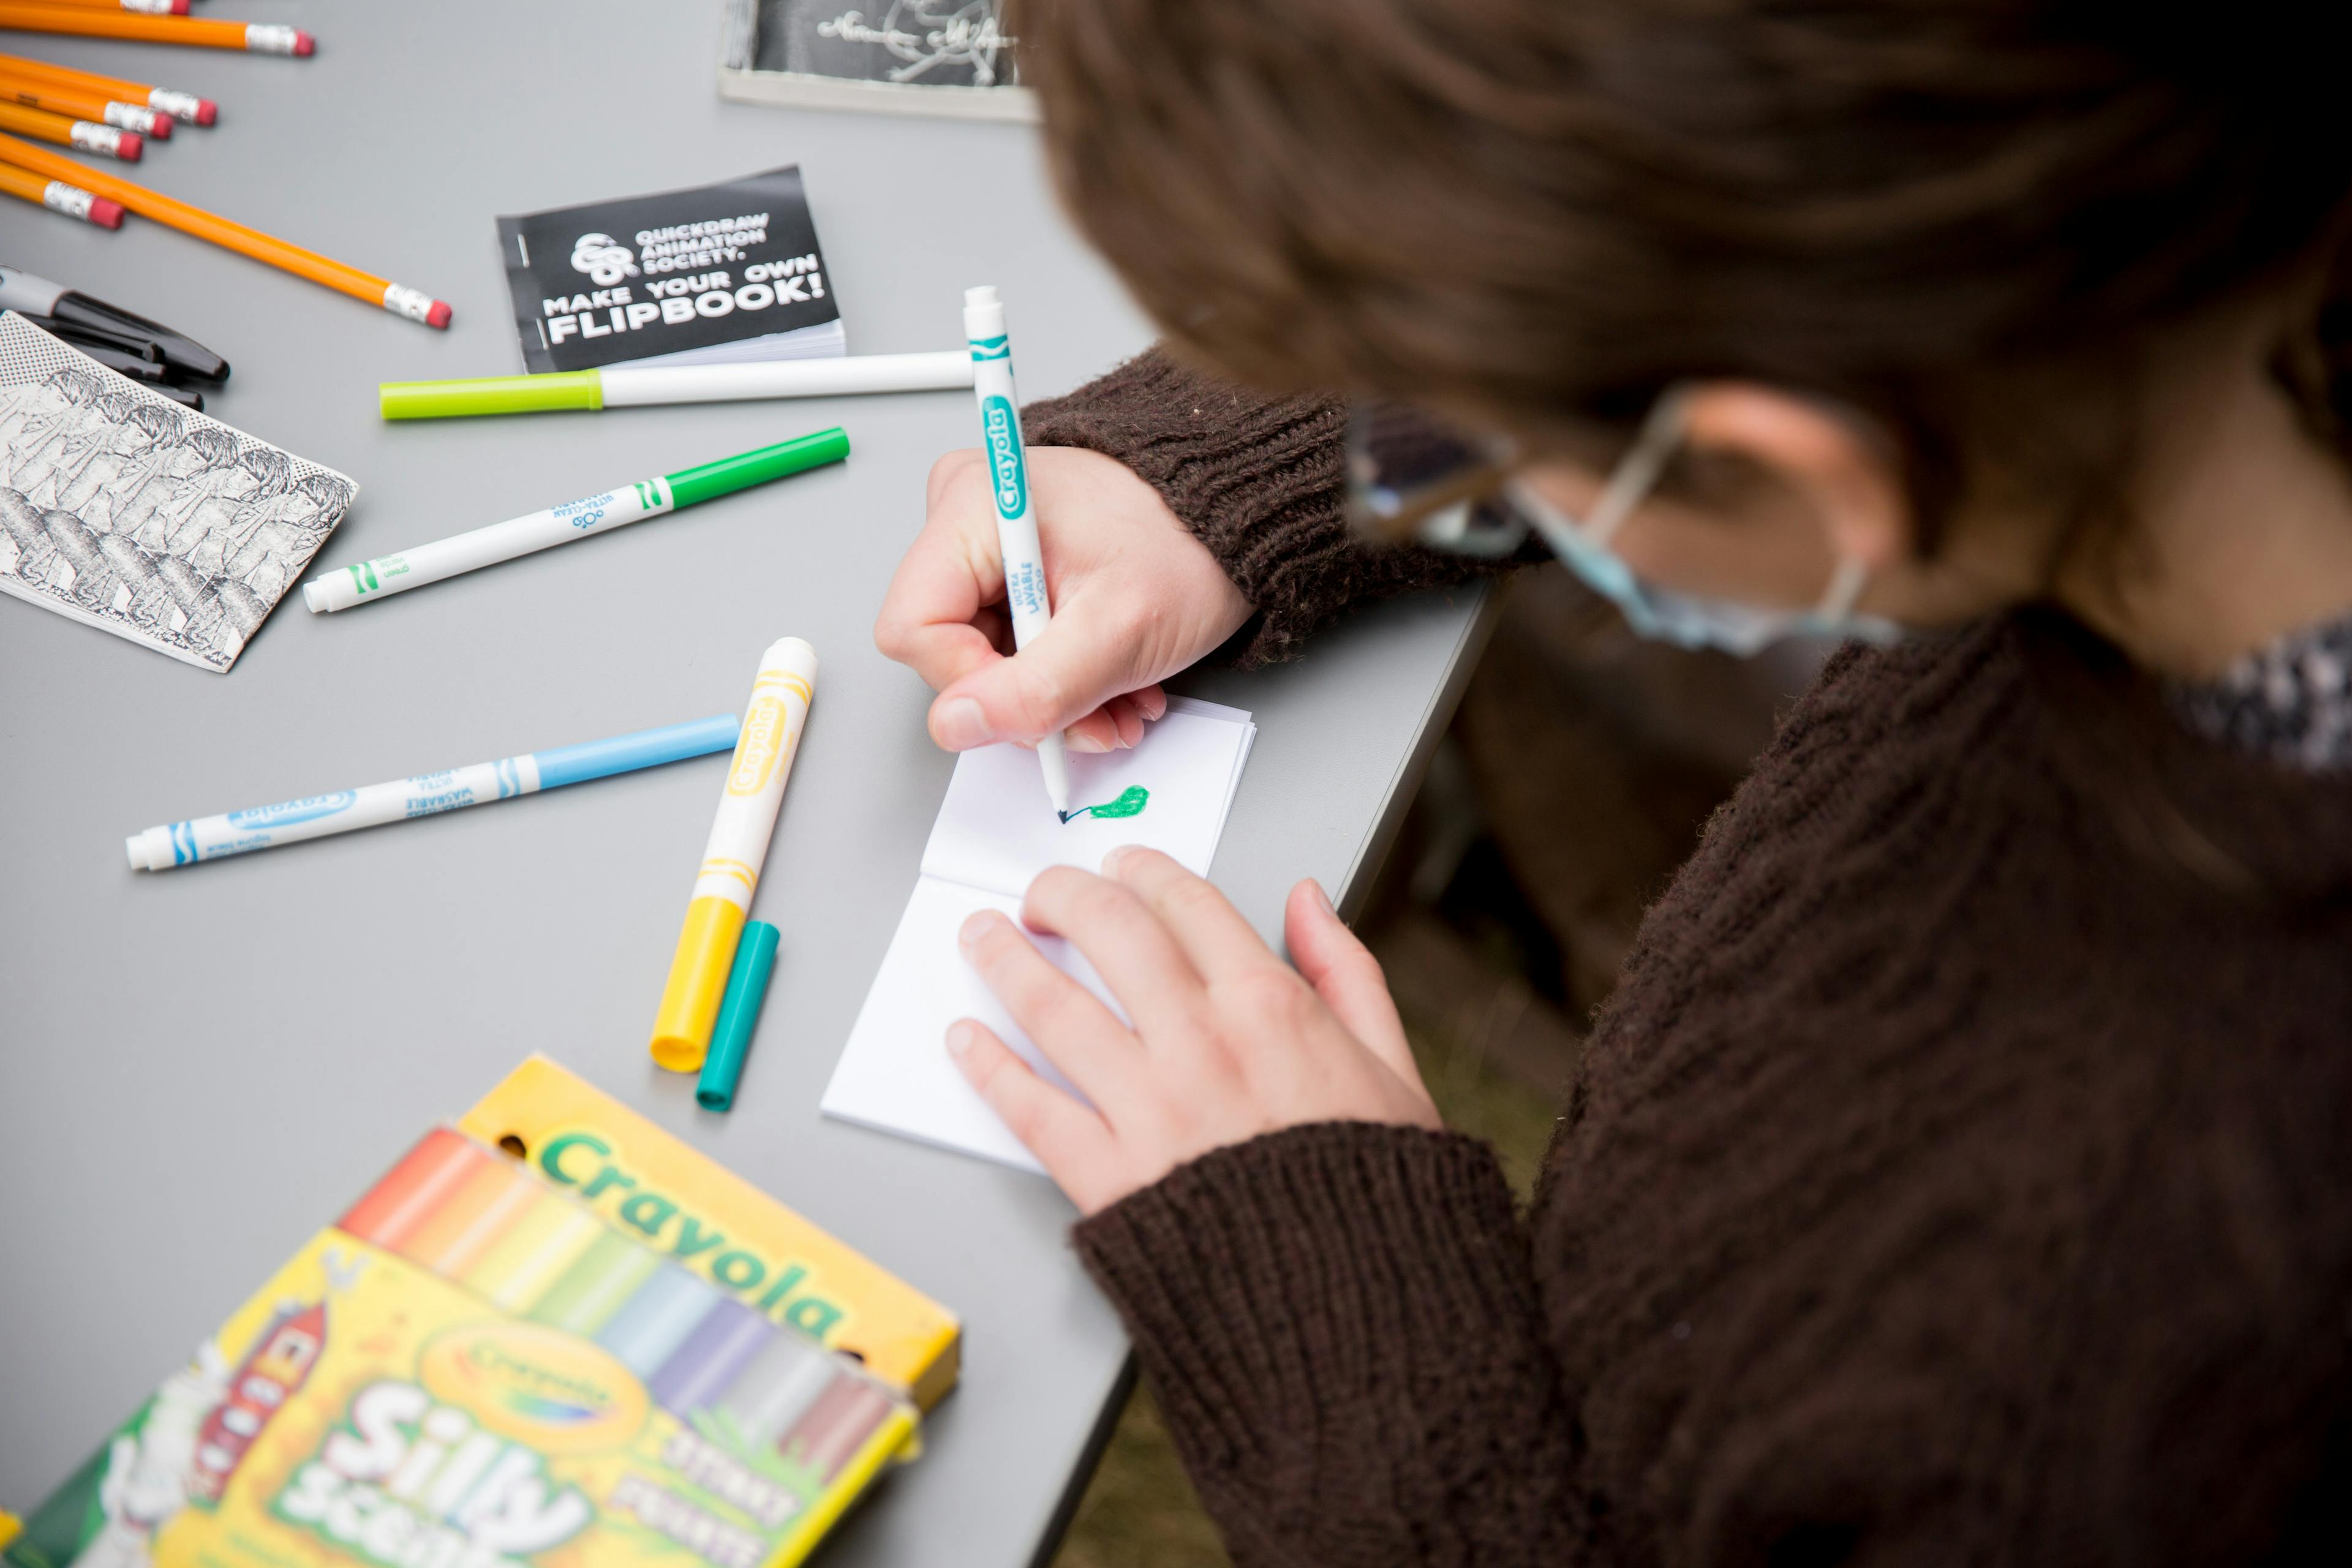 Photograph of a person from behind their left shoulder. 

Person is wearing glasses, a brown cabled-knit sweater and a face mask. 

They are sitting at a table that's covered in colored markers and a book that says "quickdraw animation society make your own flipbook!"

They are drawing something in green on a flipbook page